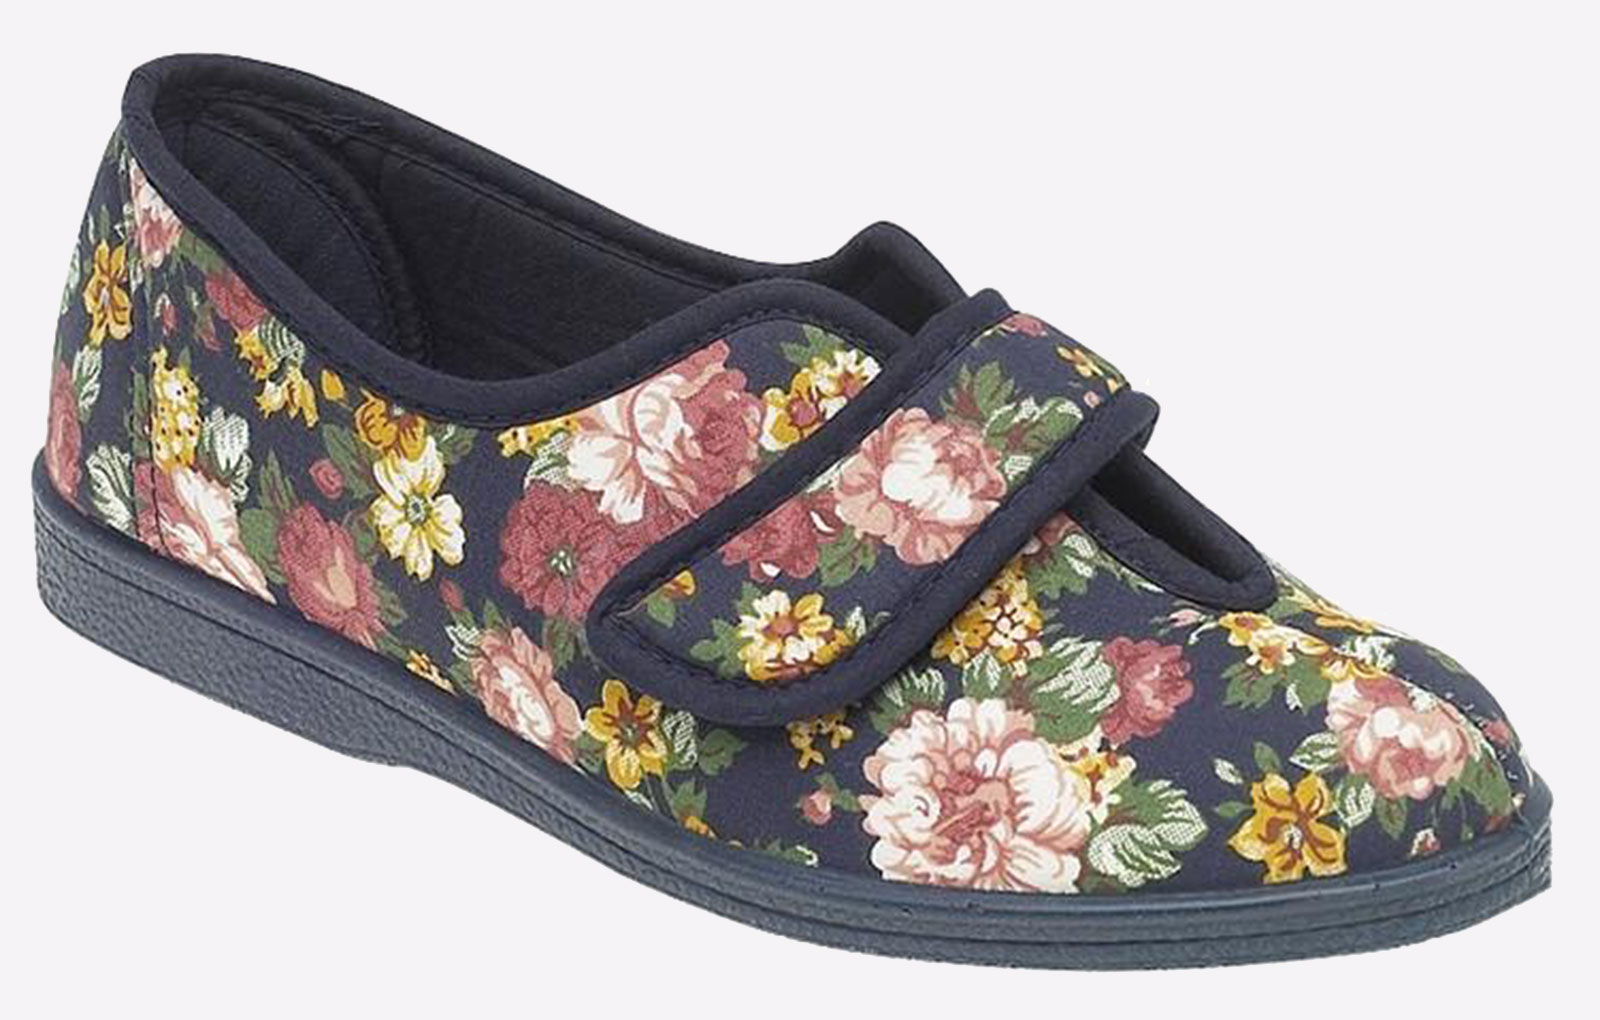 Sleepers Wilma Slippers Wide Fit Womens  - GBD-1632